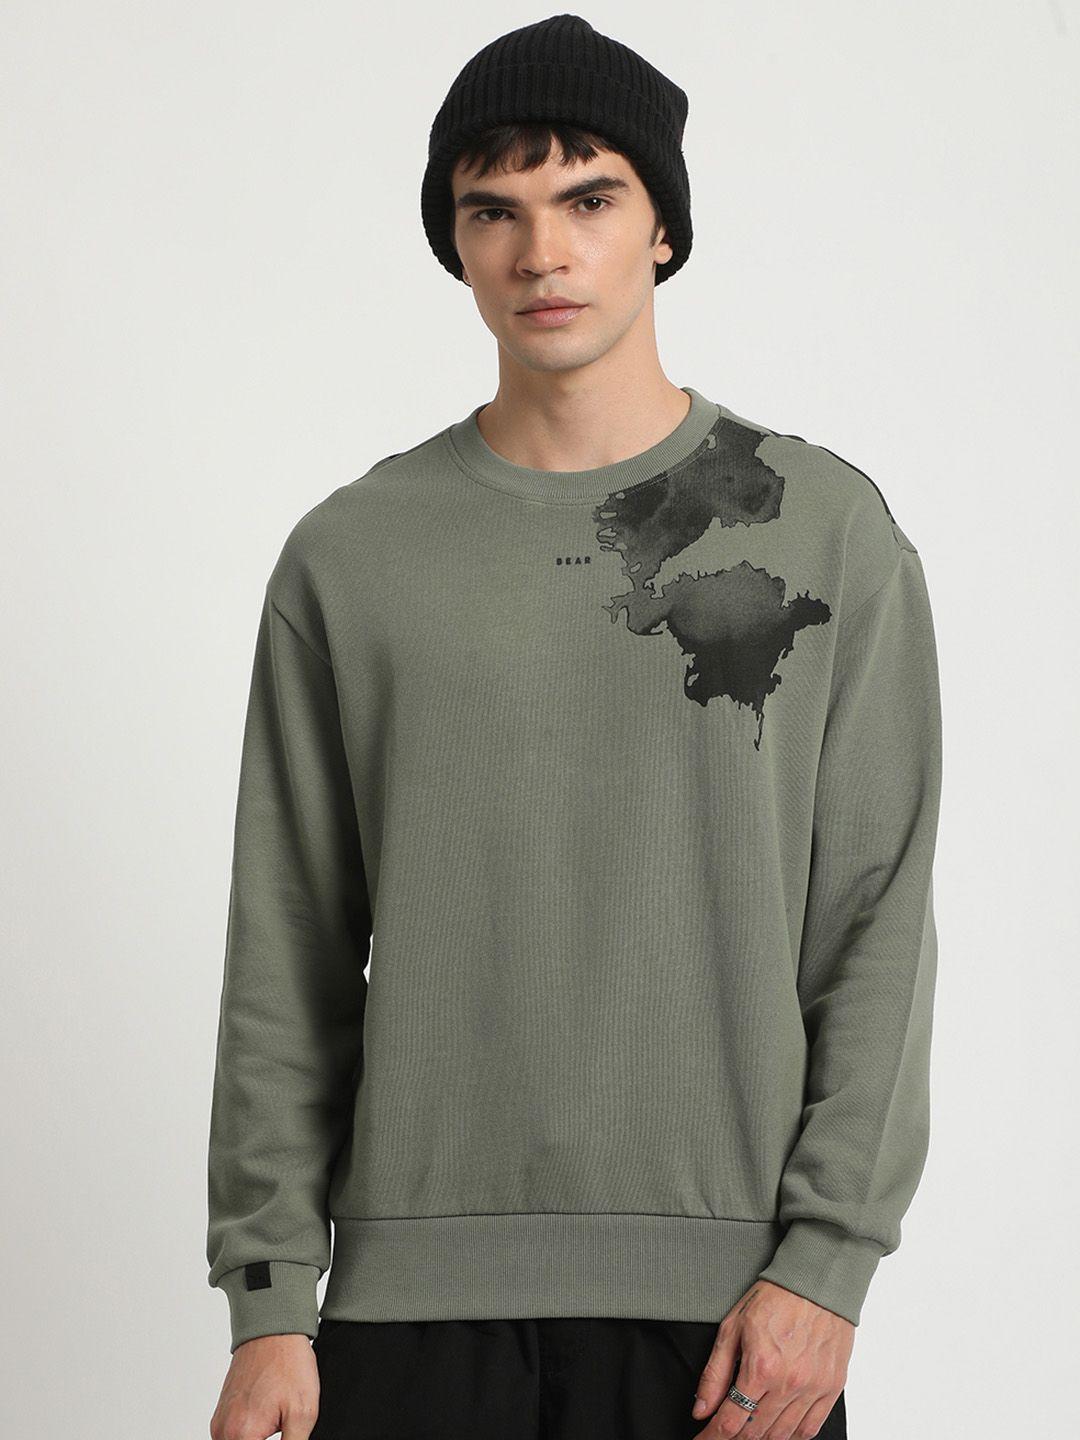 the-bear-house-abstract-printed-pure-cotton-pullover-sweatshirt